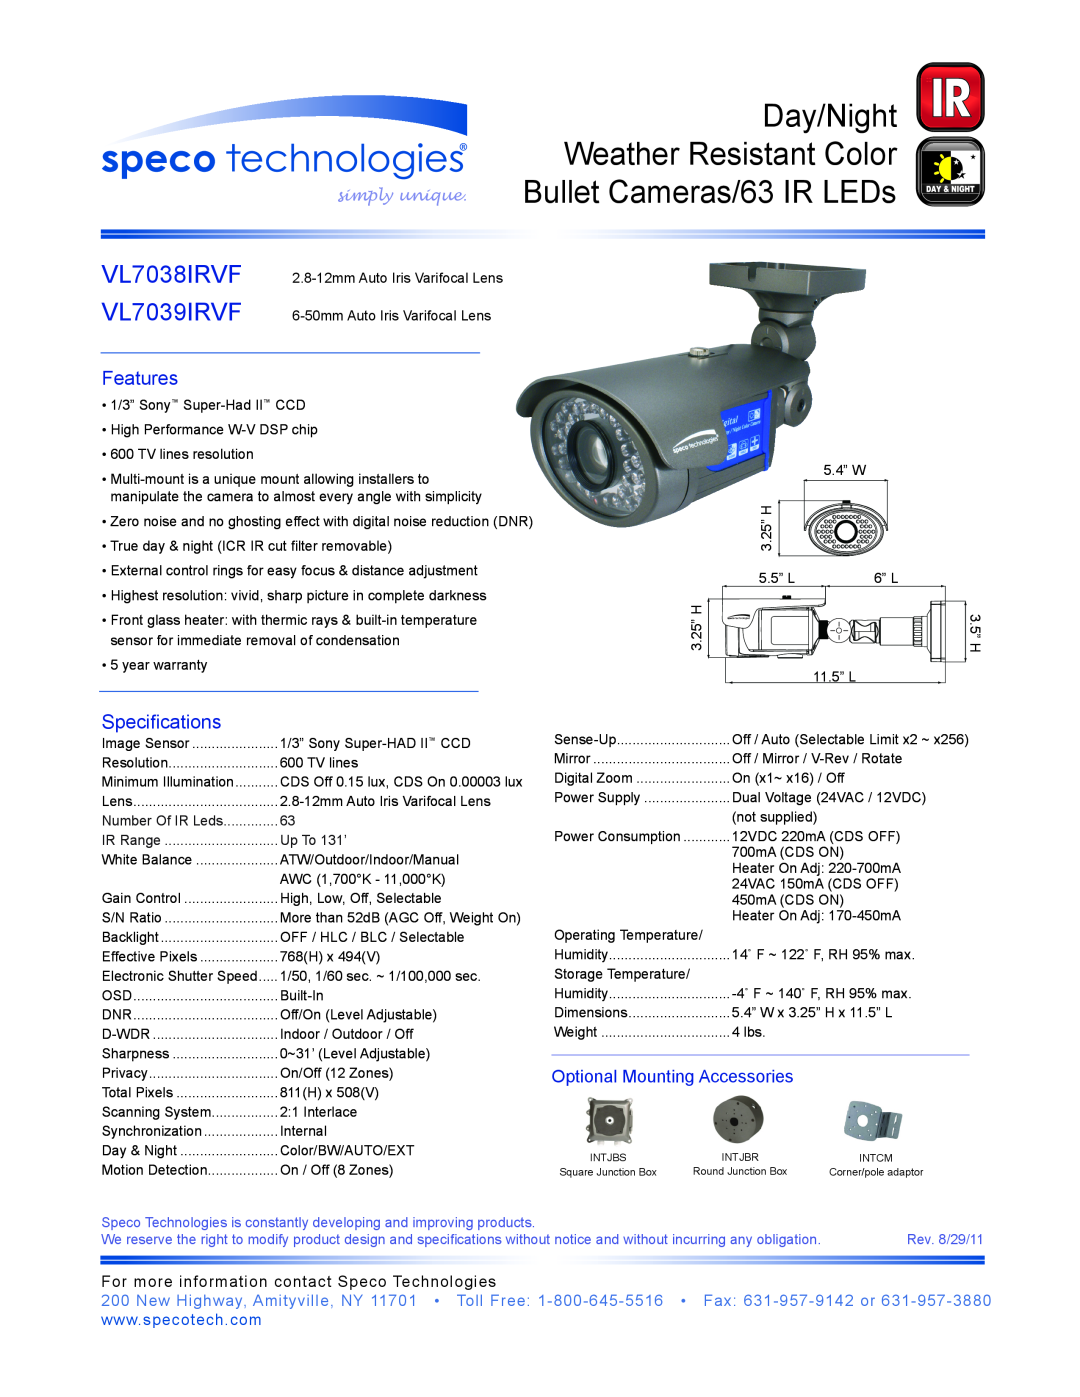 Speco Technologies VL7038IRVF dimensions Day/Night, Weather Resistant Color, Bullet Cameras/63 IR LEDs, Features, IR Range 